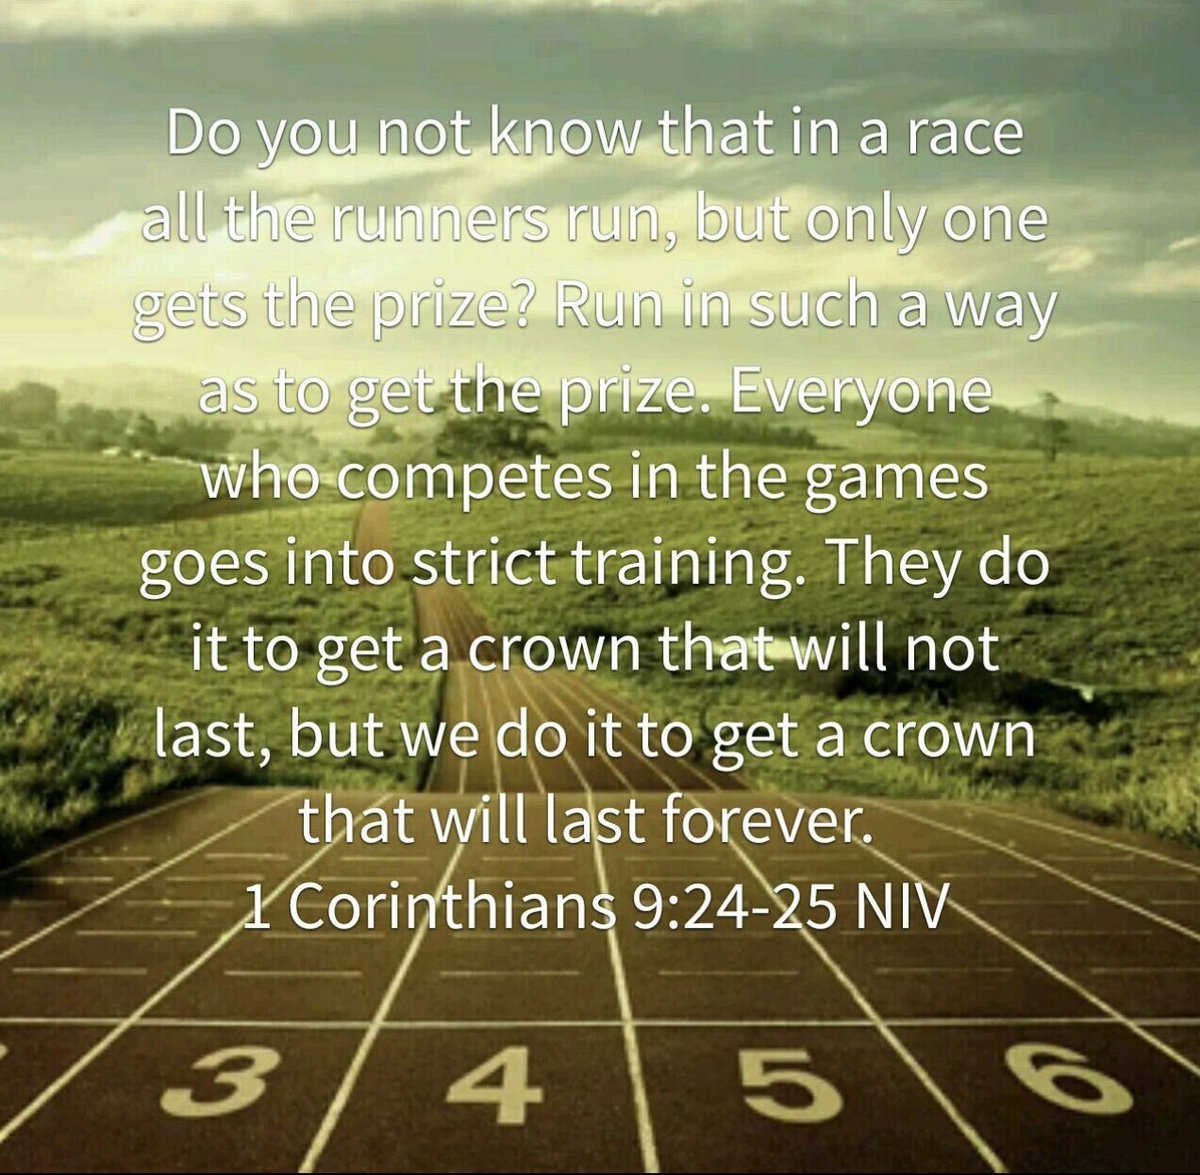 🌿Good Morning Prayer Warriors🌿 🕊Recently a dear friend reminded me GOD had prepared me my whole life for the race I’m now running! To get up, show up each morning for that days task. Yes,LORD, help me stay the course, keeping my running shoes on & hitting the track. Amen🕊